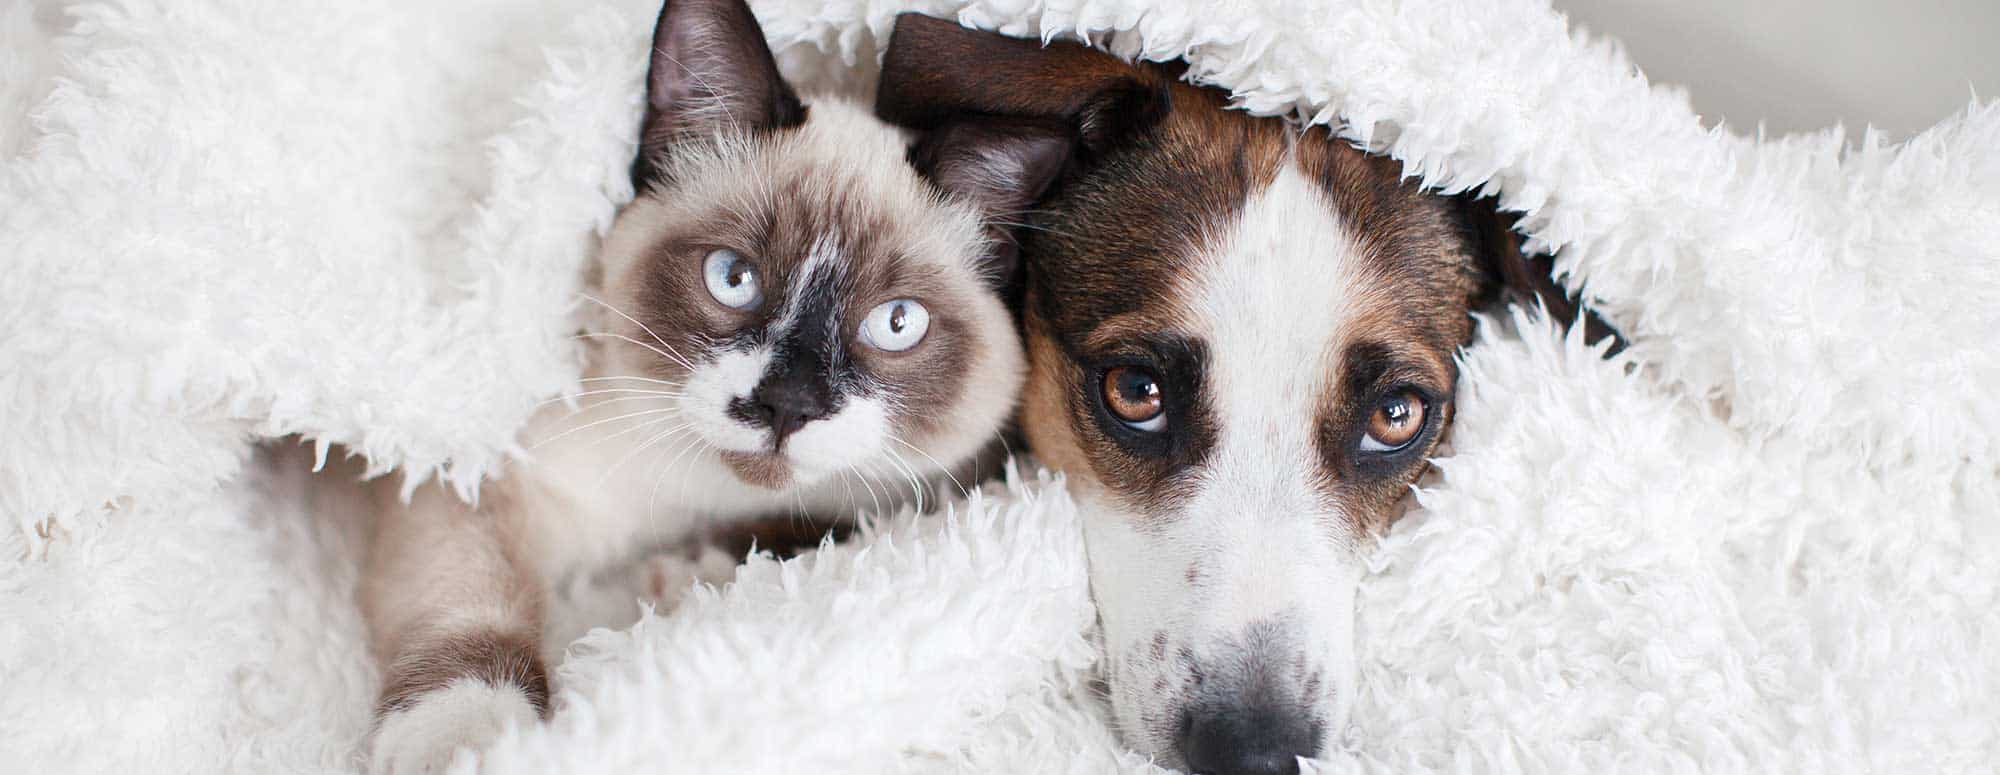 A cat and dog cuddling in a blanket